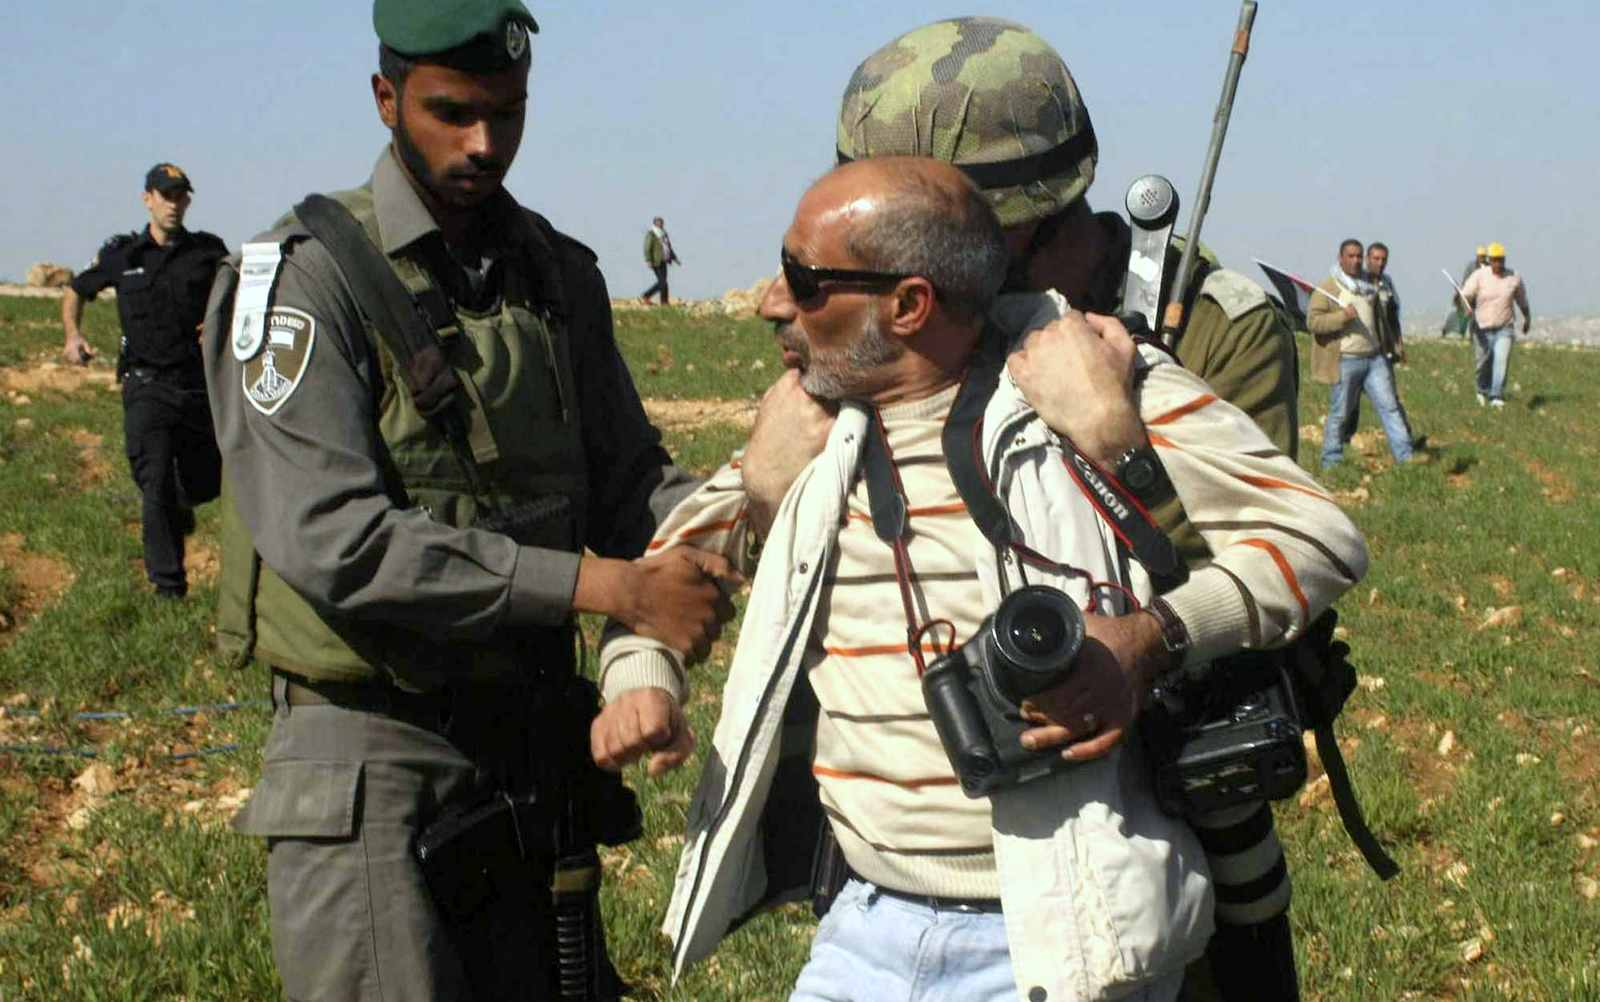 Israeli security detain The Associated Press photographer Nasser Shiyoukhi during a Palestinian protest in Yatta in the West Bank on Saturday. Shiyoukhi was released without charge after Saturday’s incident. (photo credit: AP Photo)